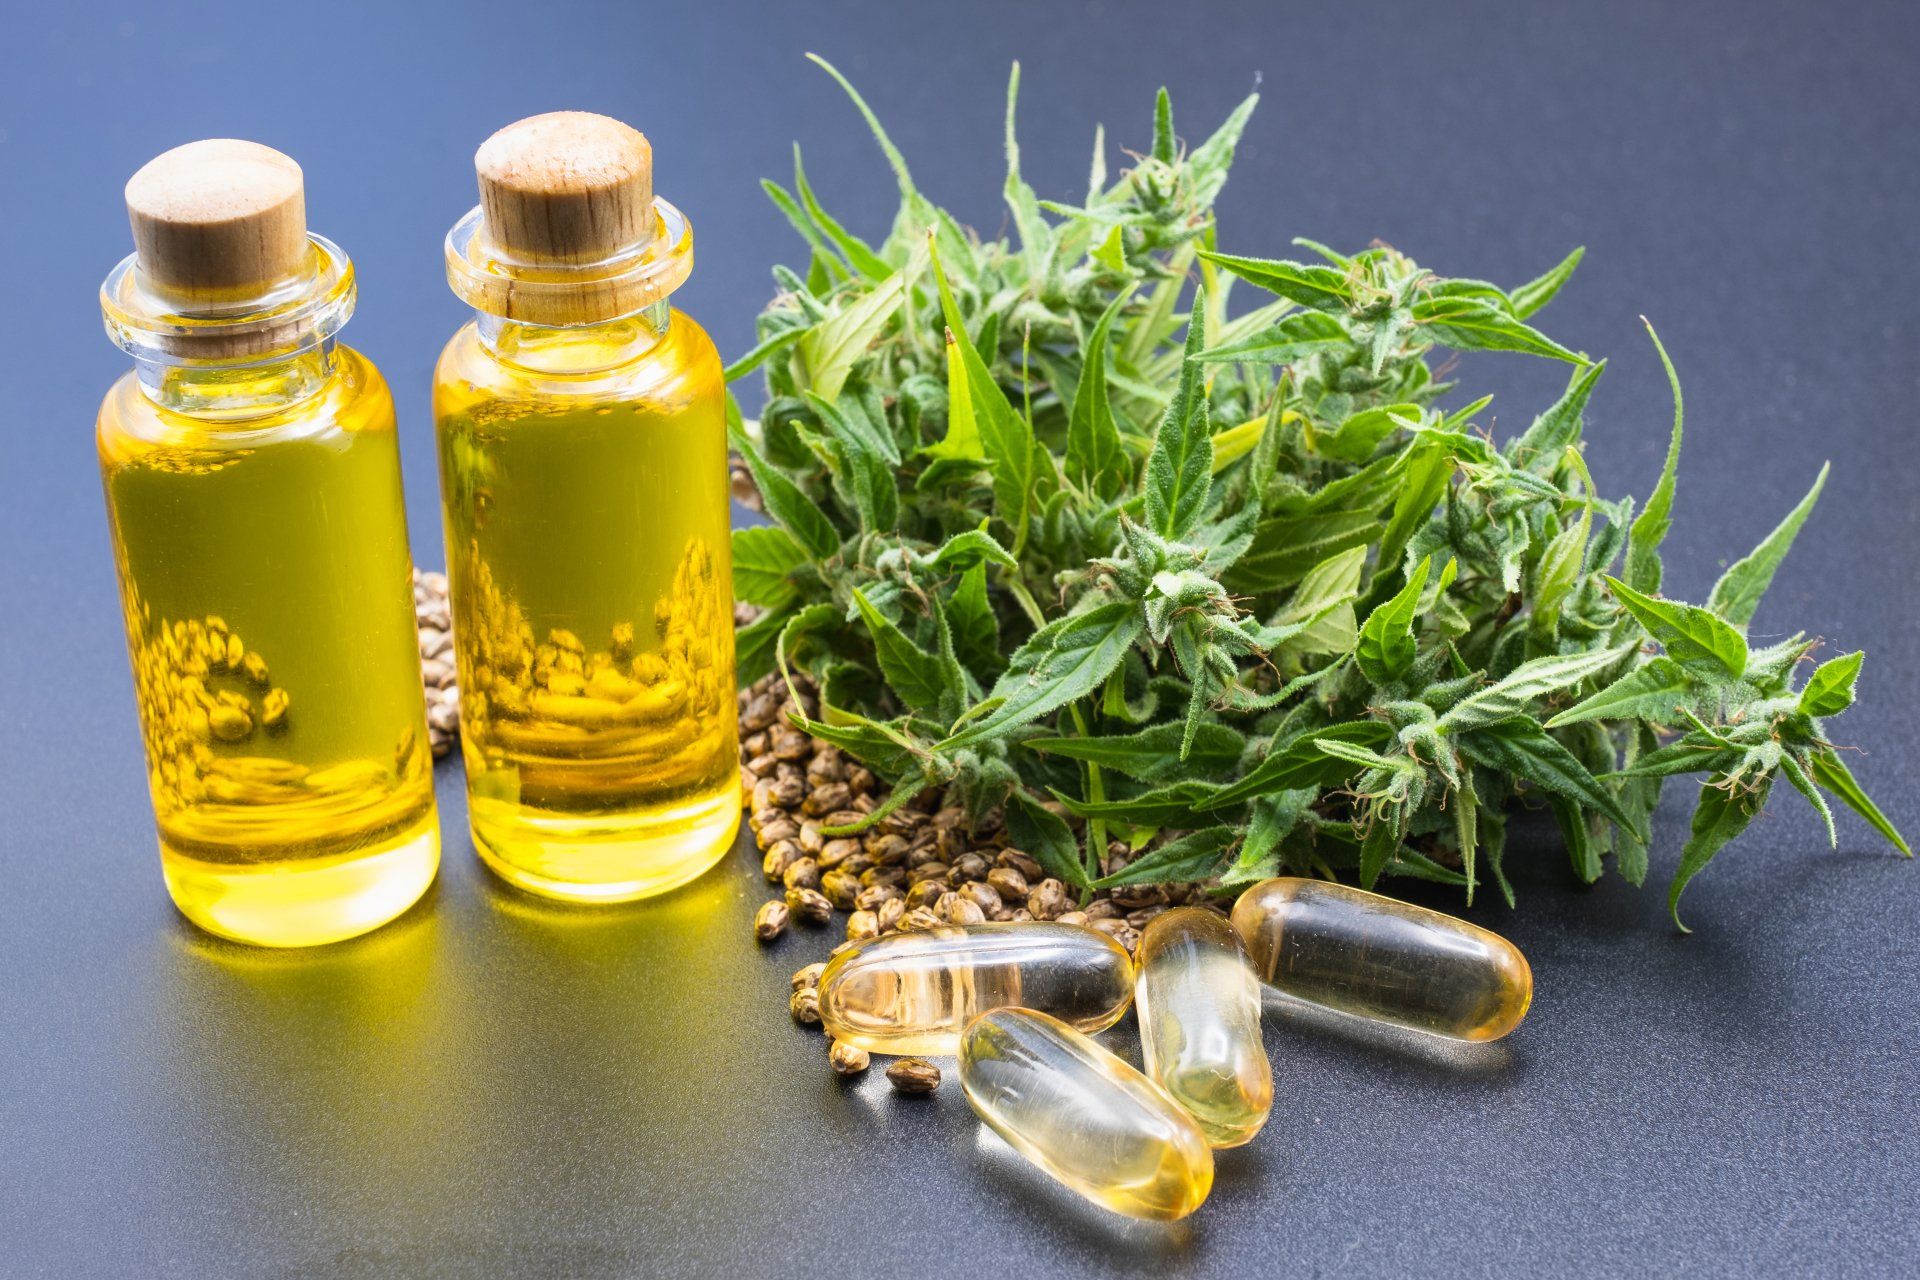 Buy Cbd Oil Newcastle Uk Like Bill Gates To Succeed In Your Startup